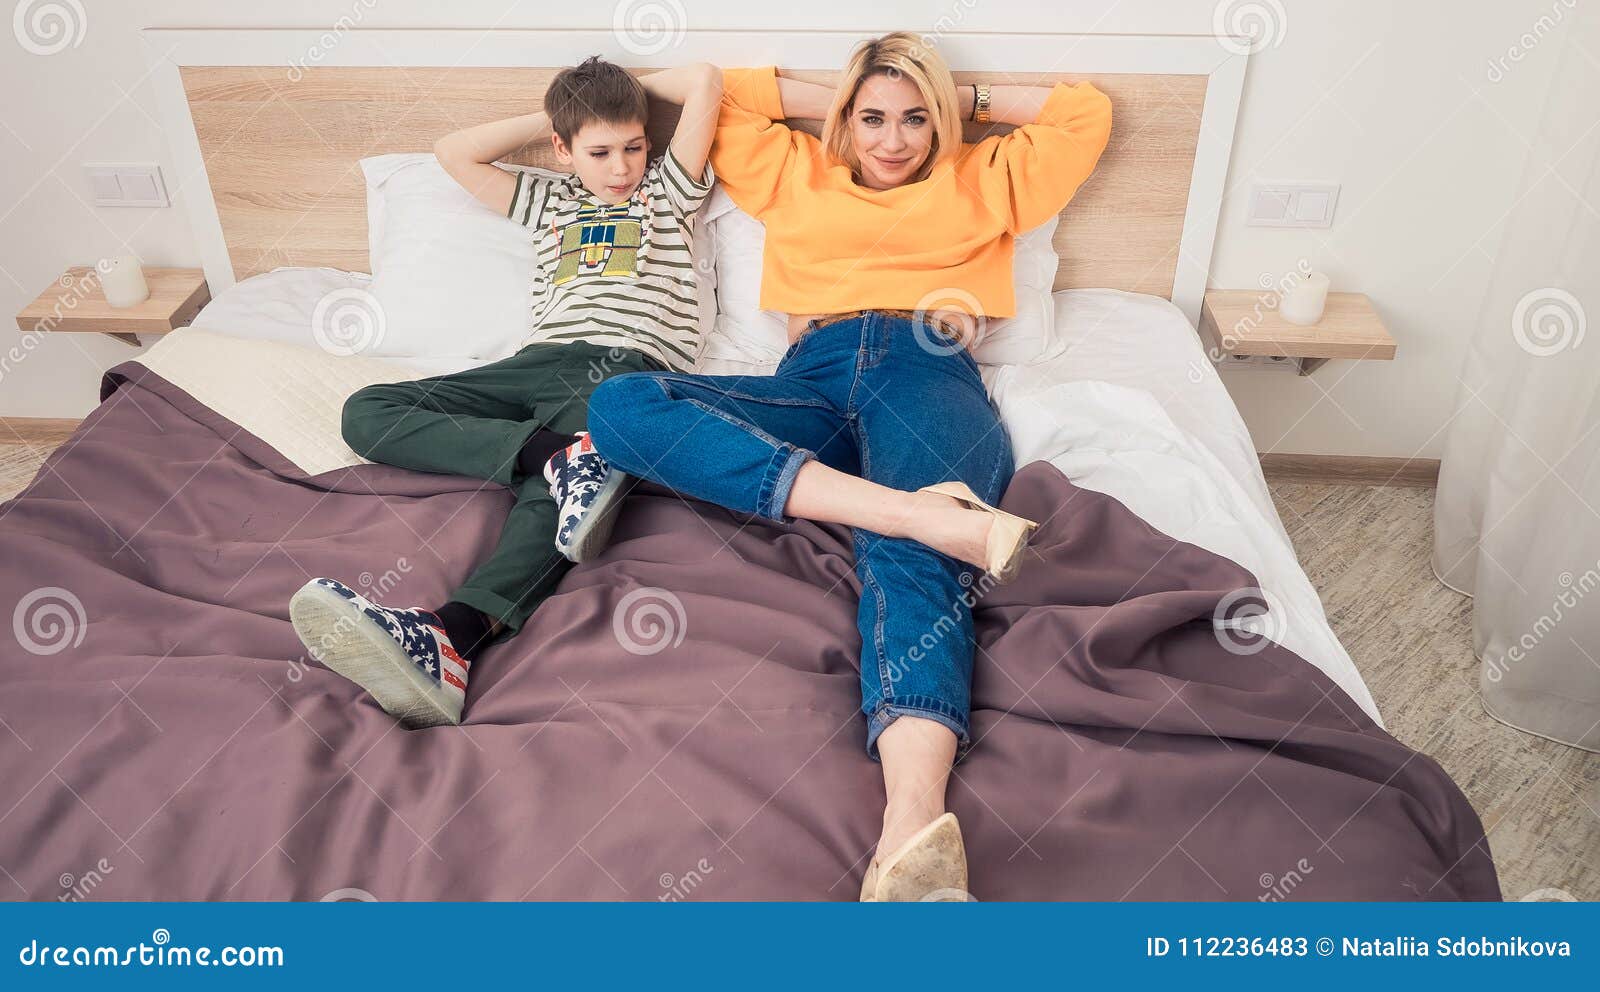 Mom And Son In Bed exam tumblr